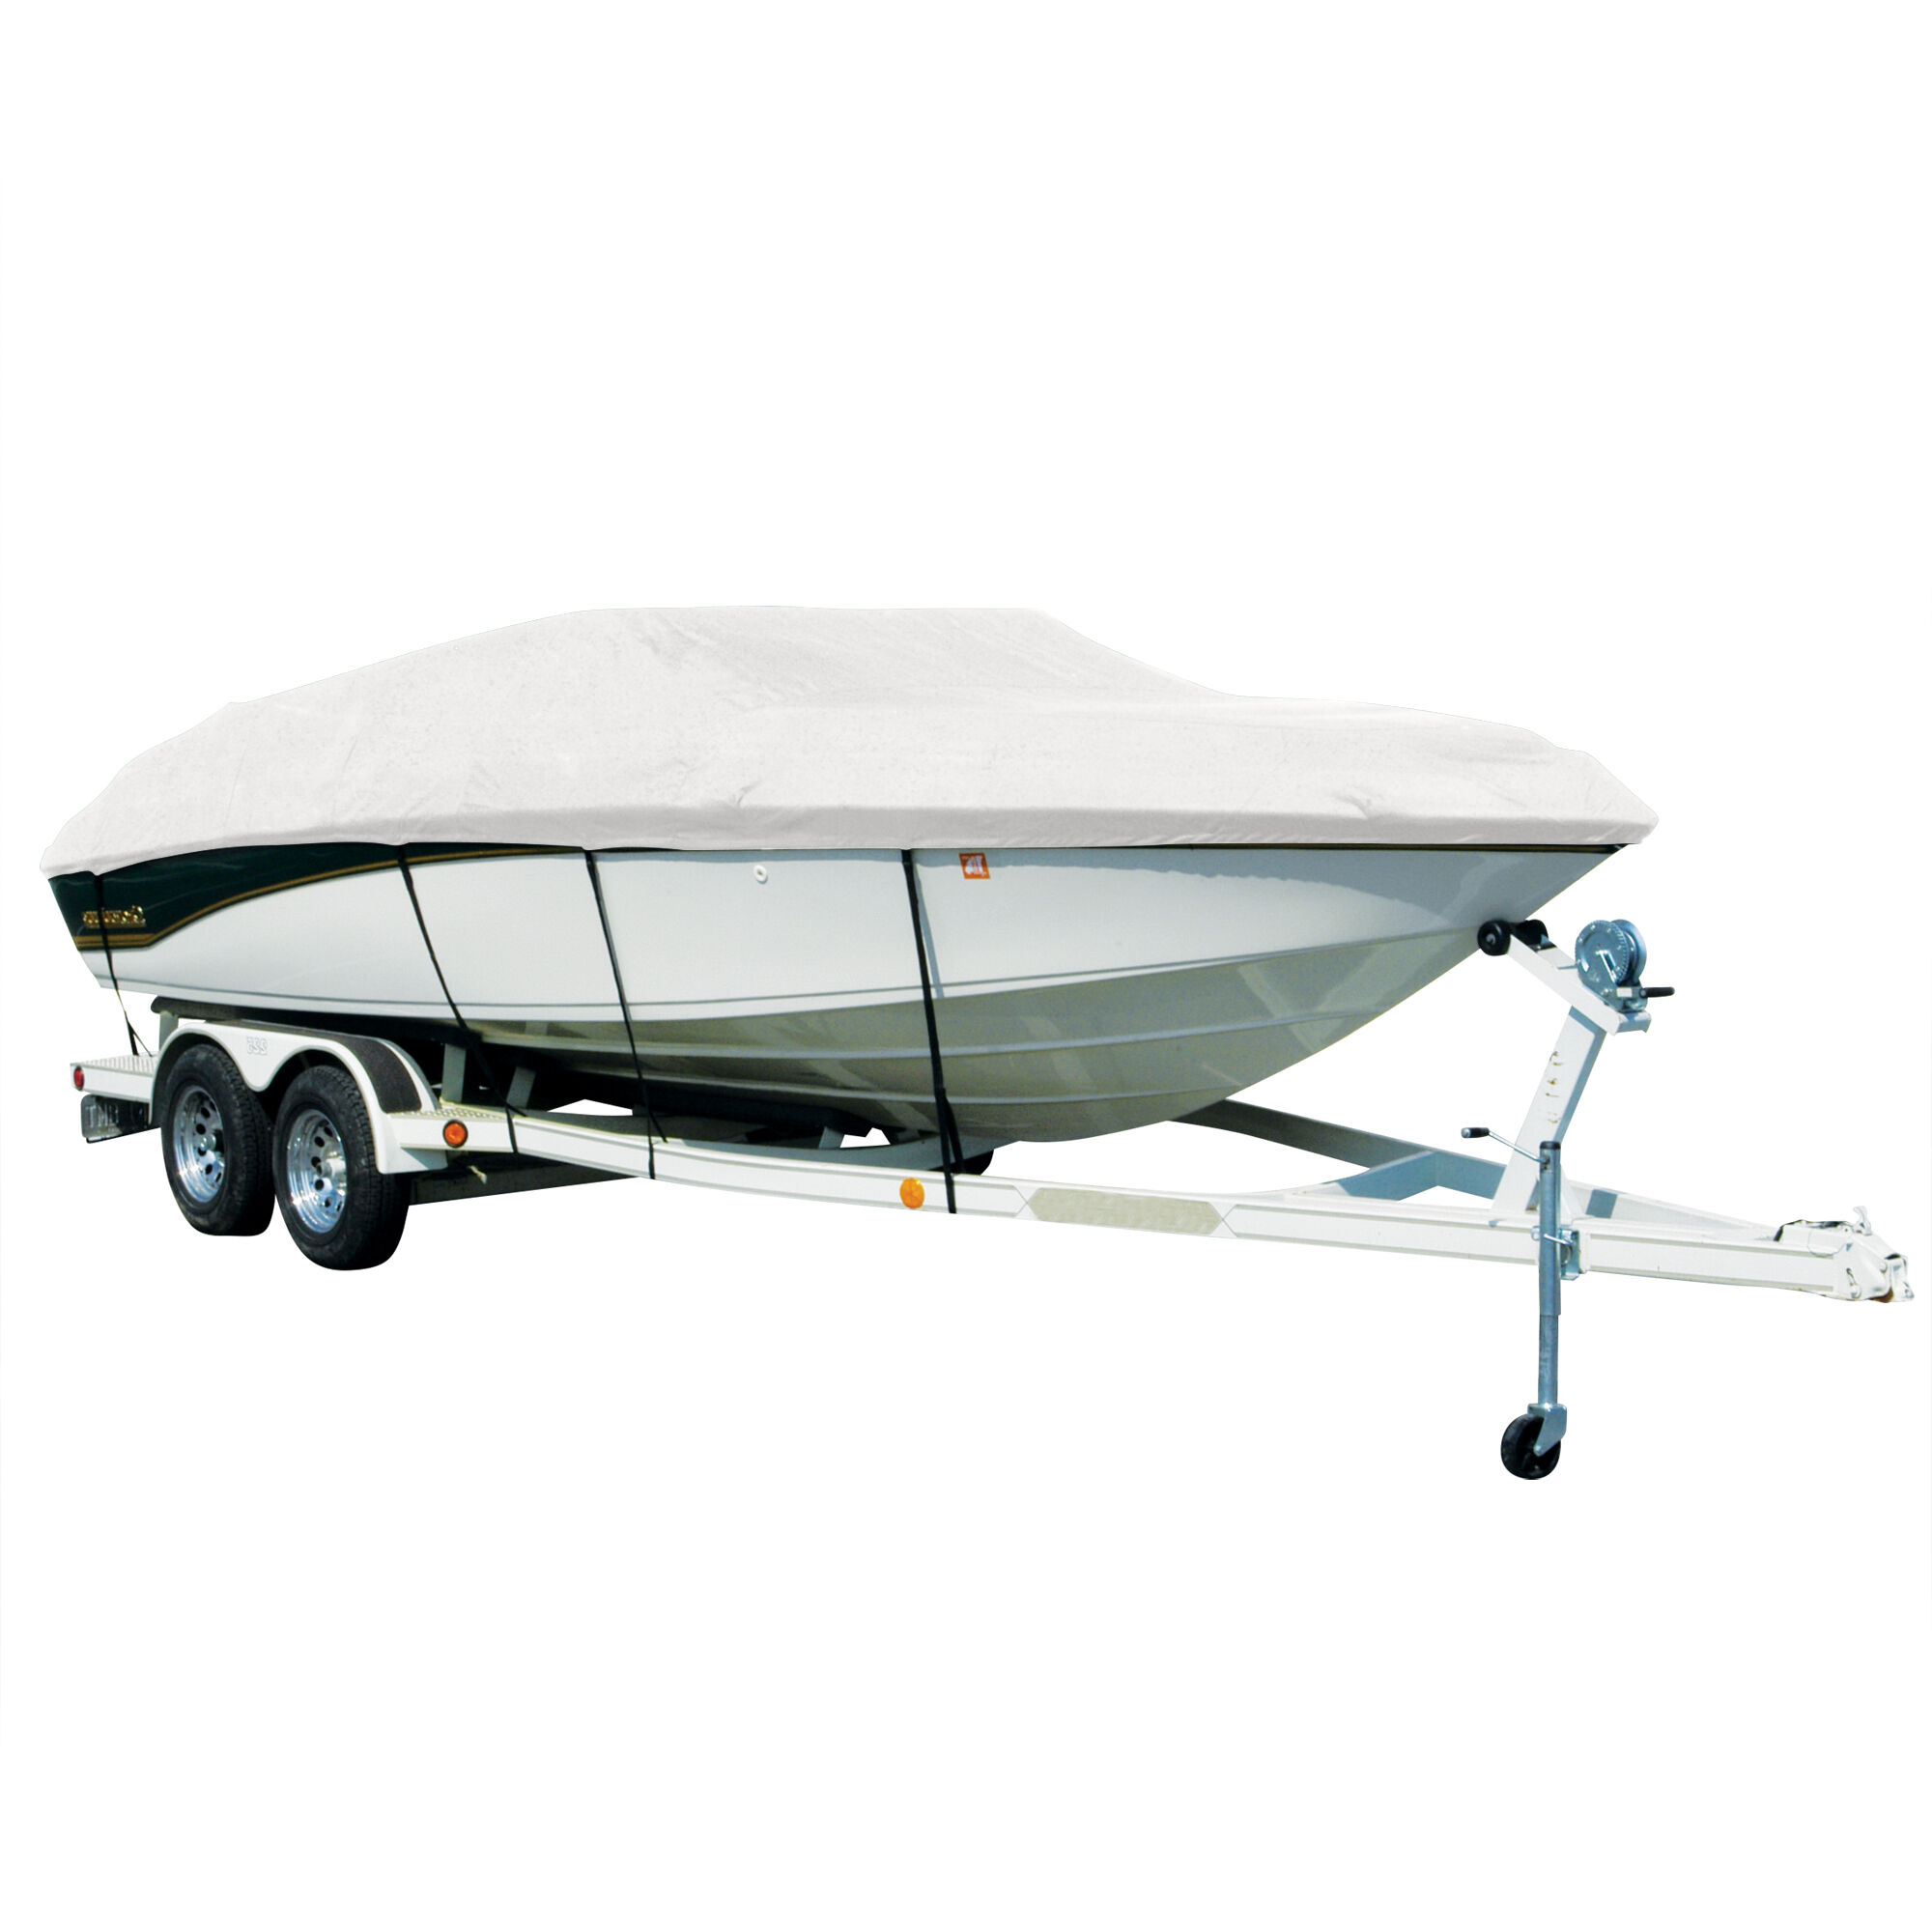 Covermate Sharkskin Plus Exact-Fit Cover for Zodiac Pro Open 650 Pro Open 650 w/ Hard Top w/ Strb Console O/B. White